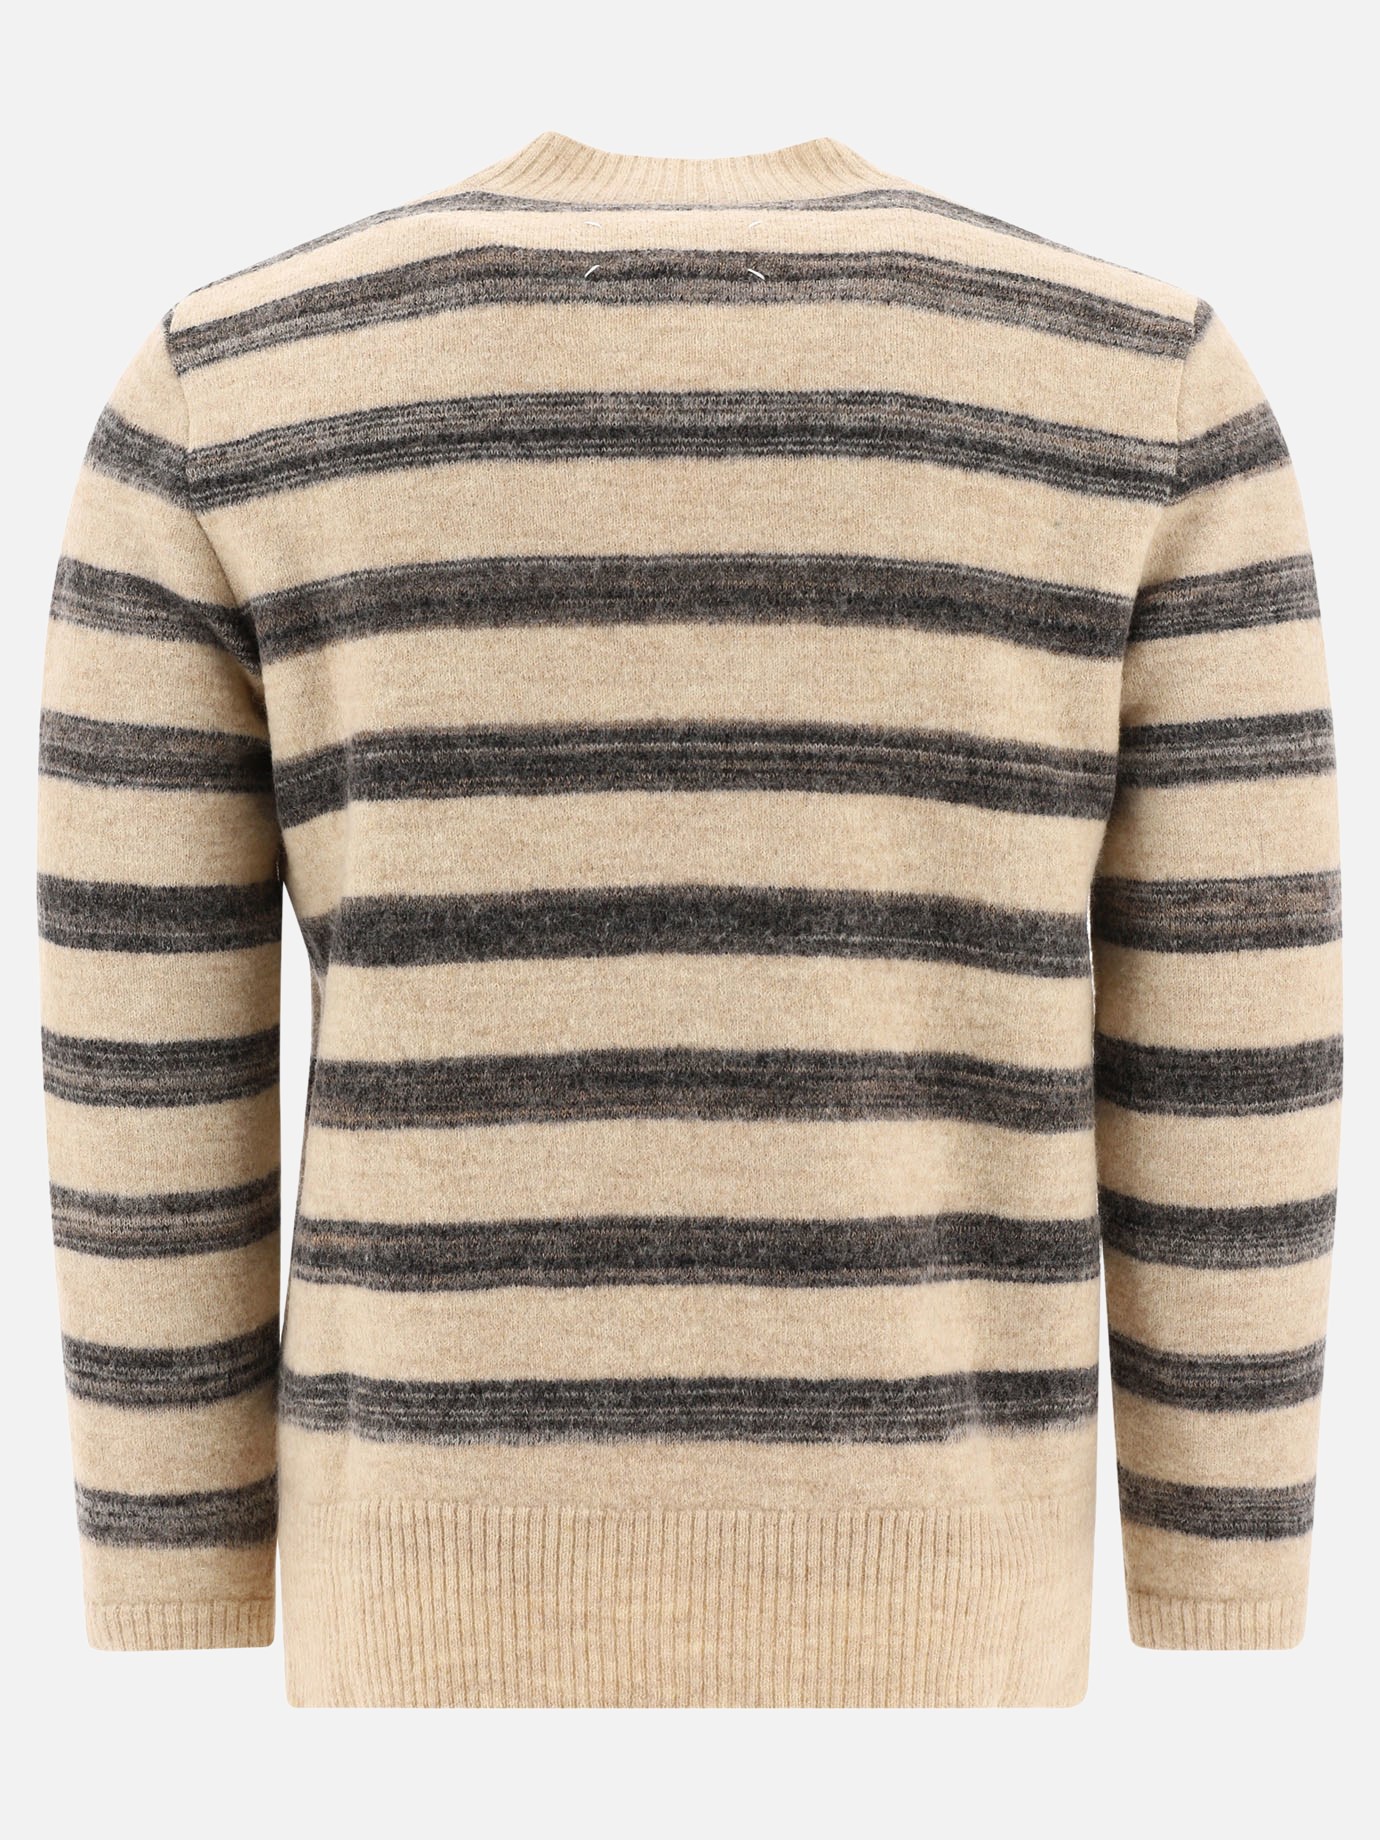 Maglione a righe  Four Stitches  by Maison Margiela